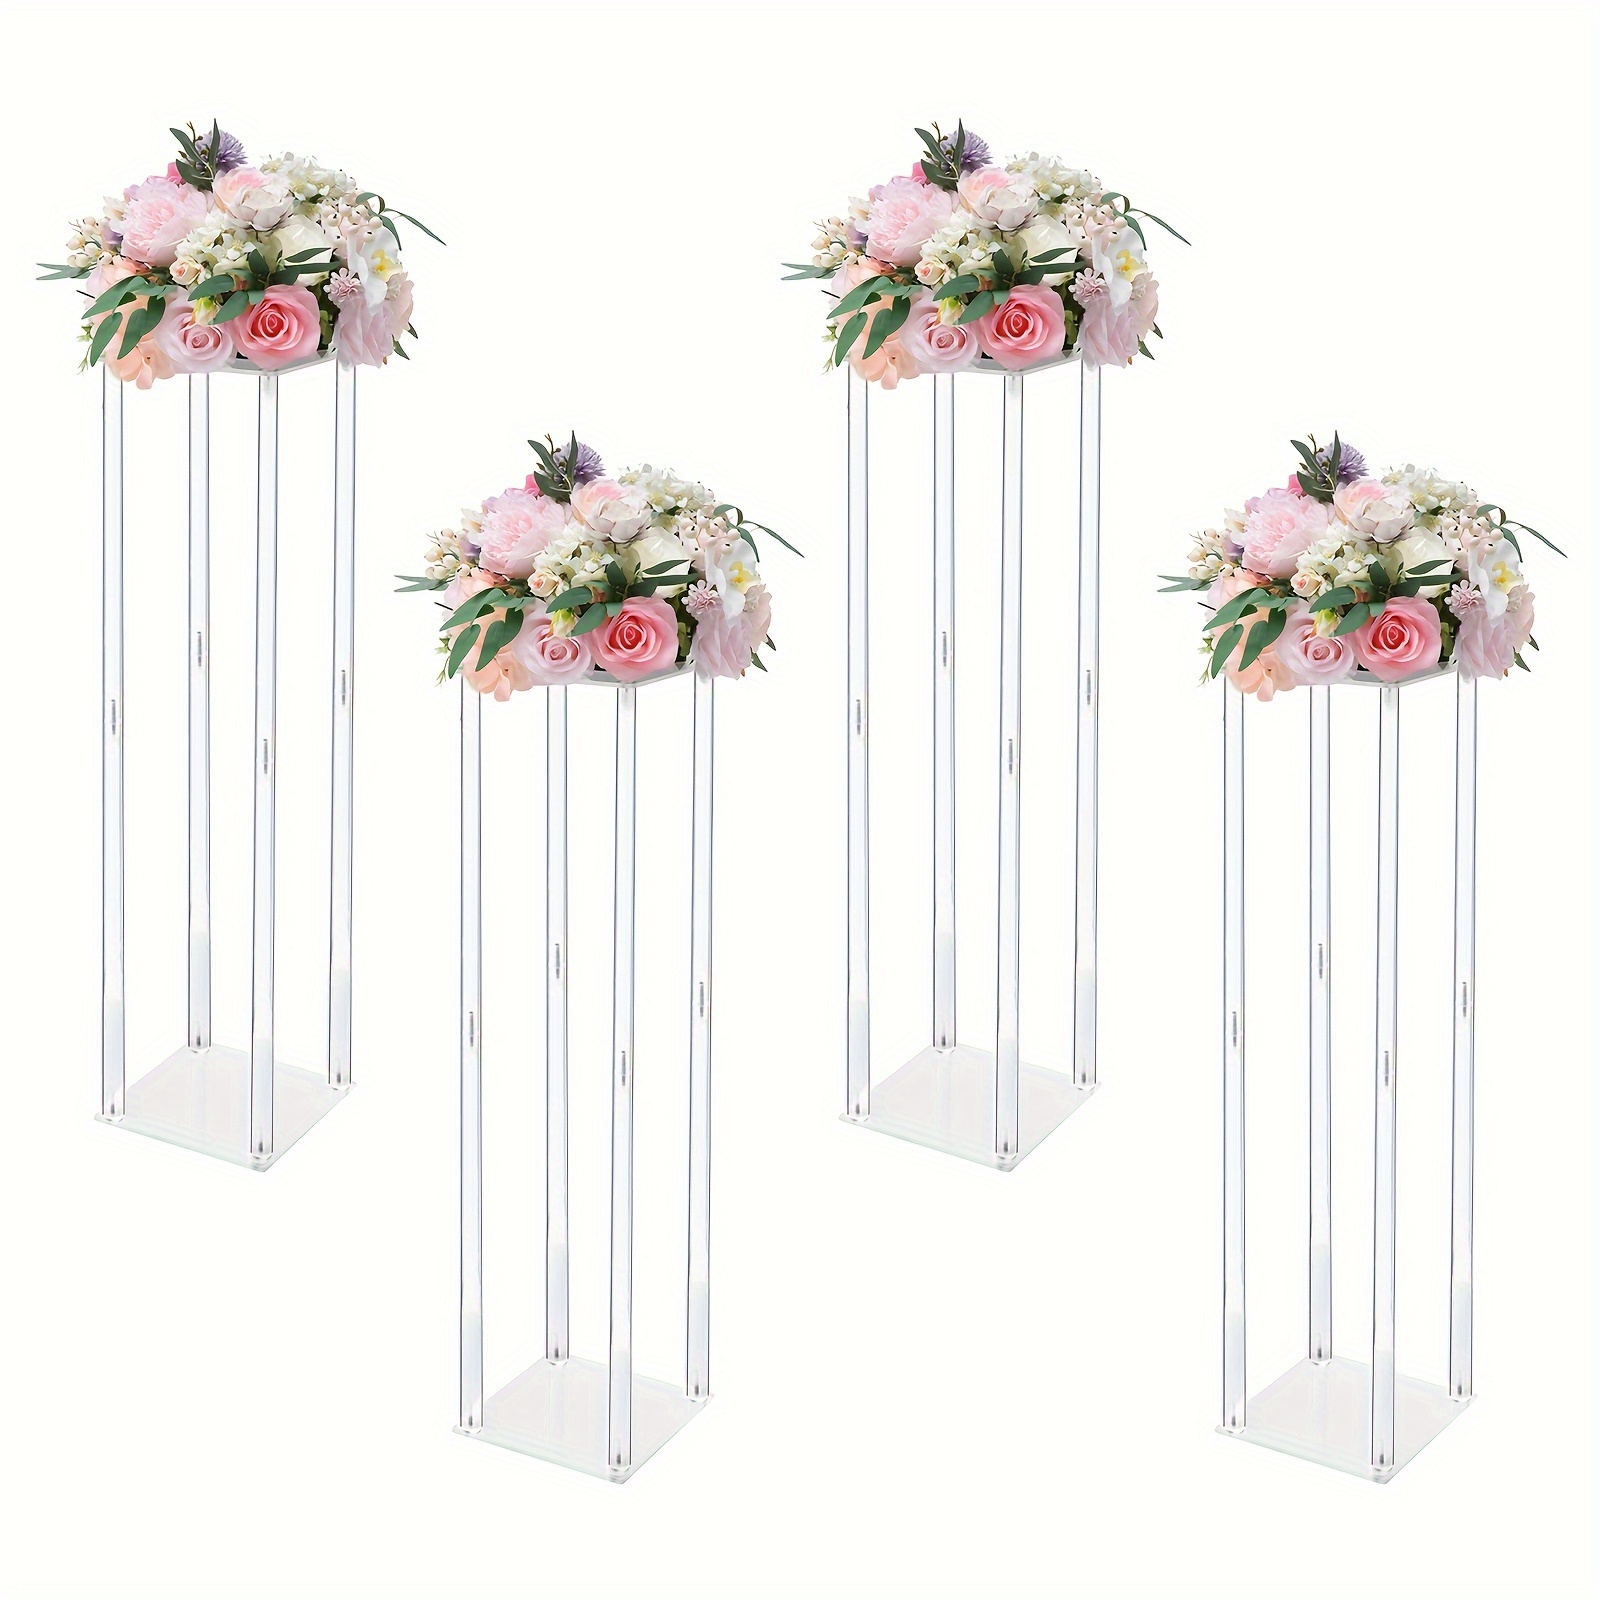 

4pcs Acrylic Flower Vase Column Stand 31.5inch For Wedding Decorations, Events Reception, Birthday, Home Decor, Indoor Outdoor Ceremony